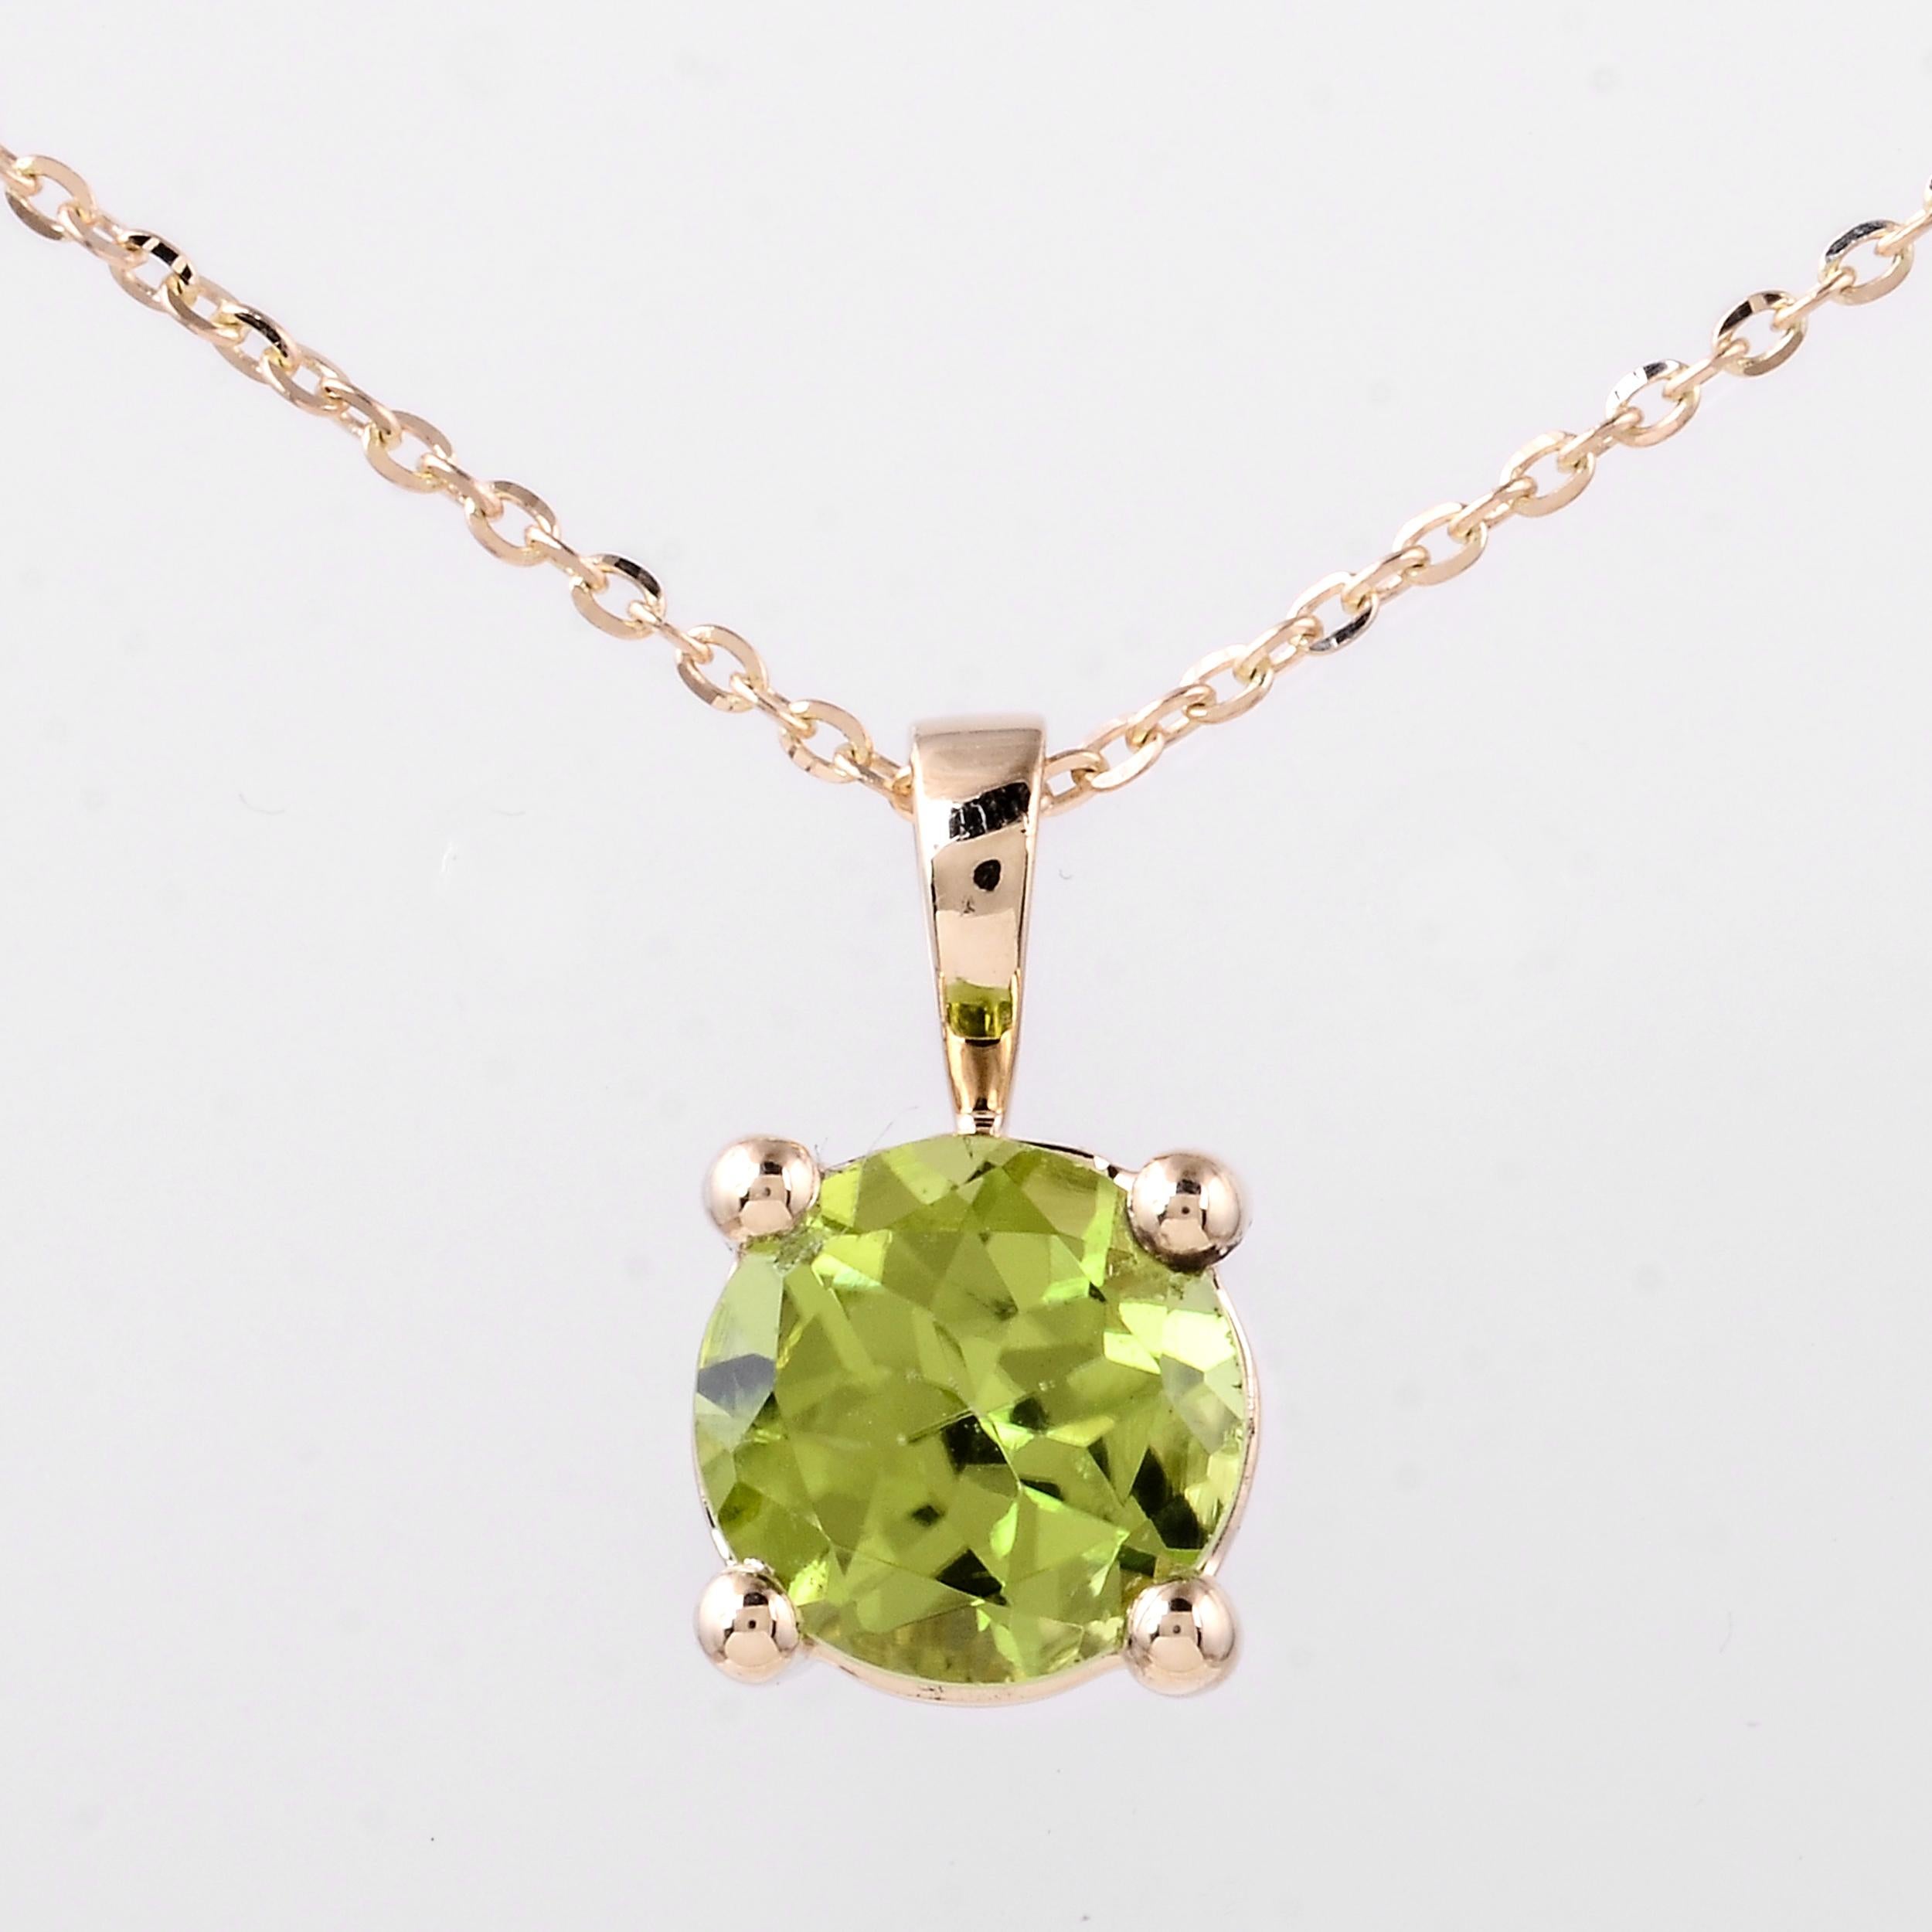 Brilliant Cut 14K Peridot Pendant Necklace 1.34ct - Elegant Jewelry for Timeless Style For Sale